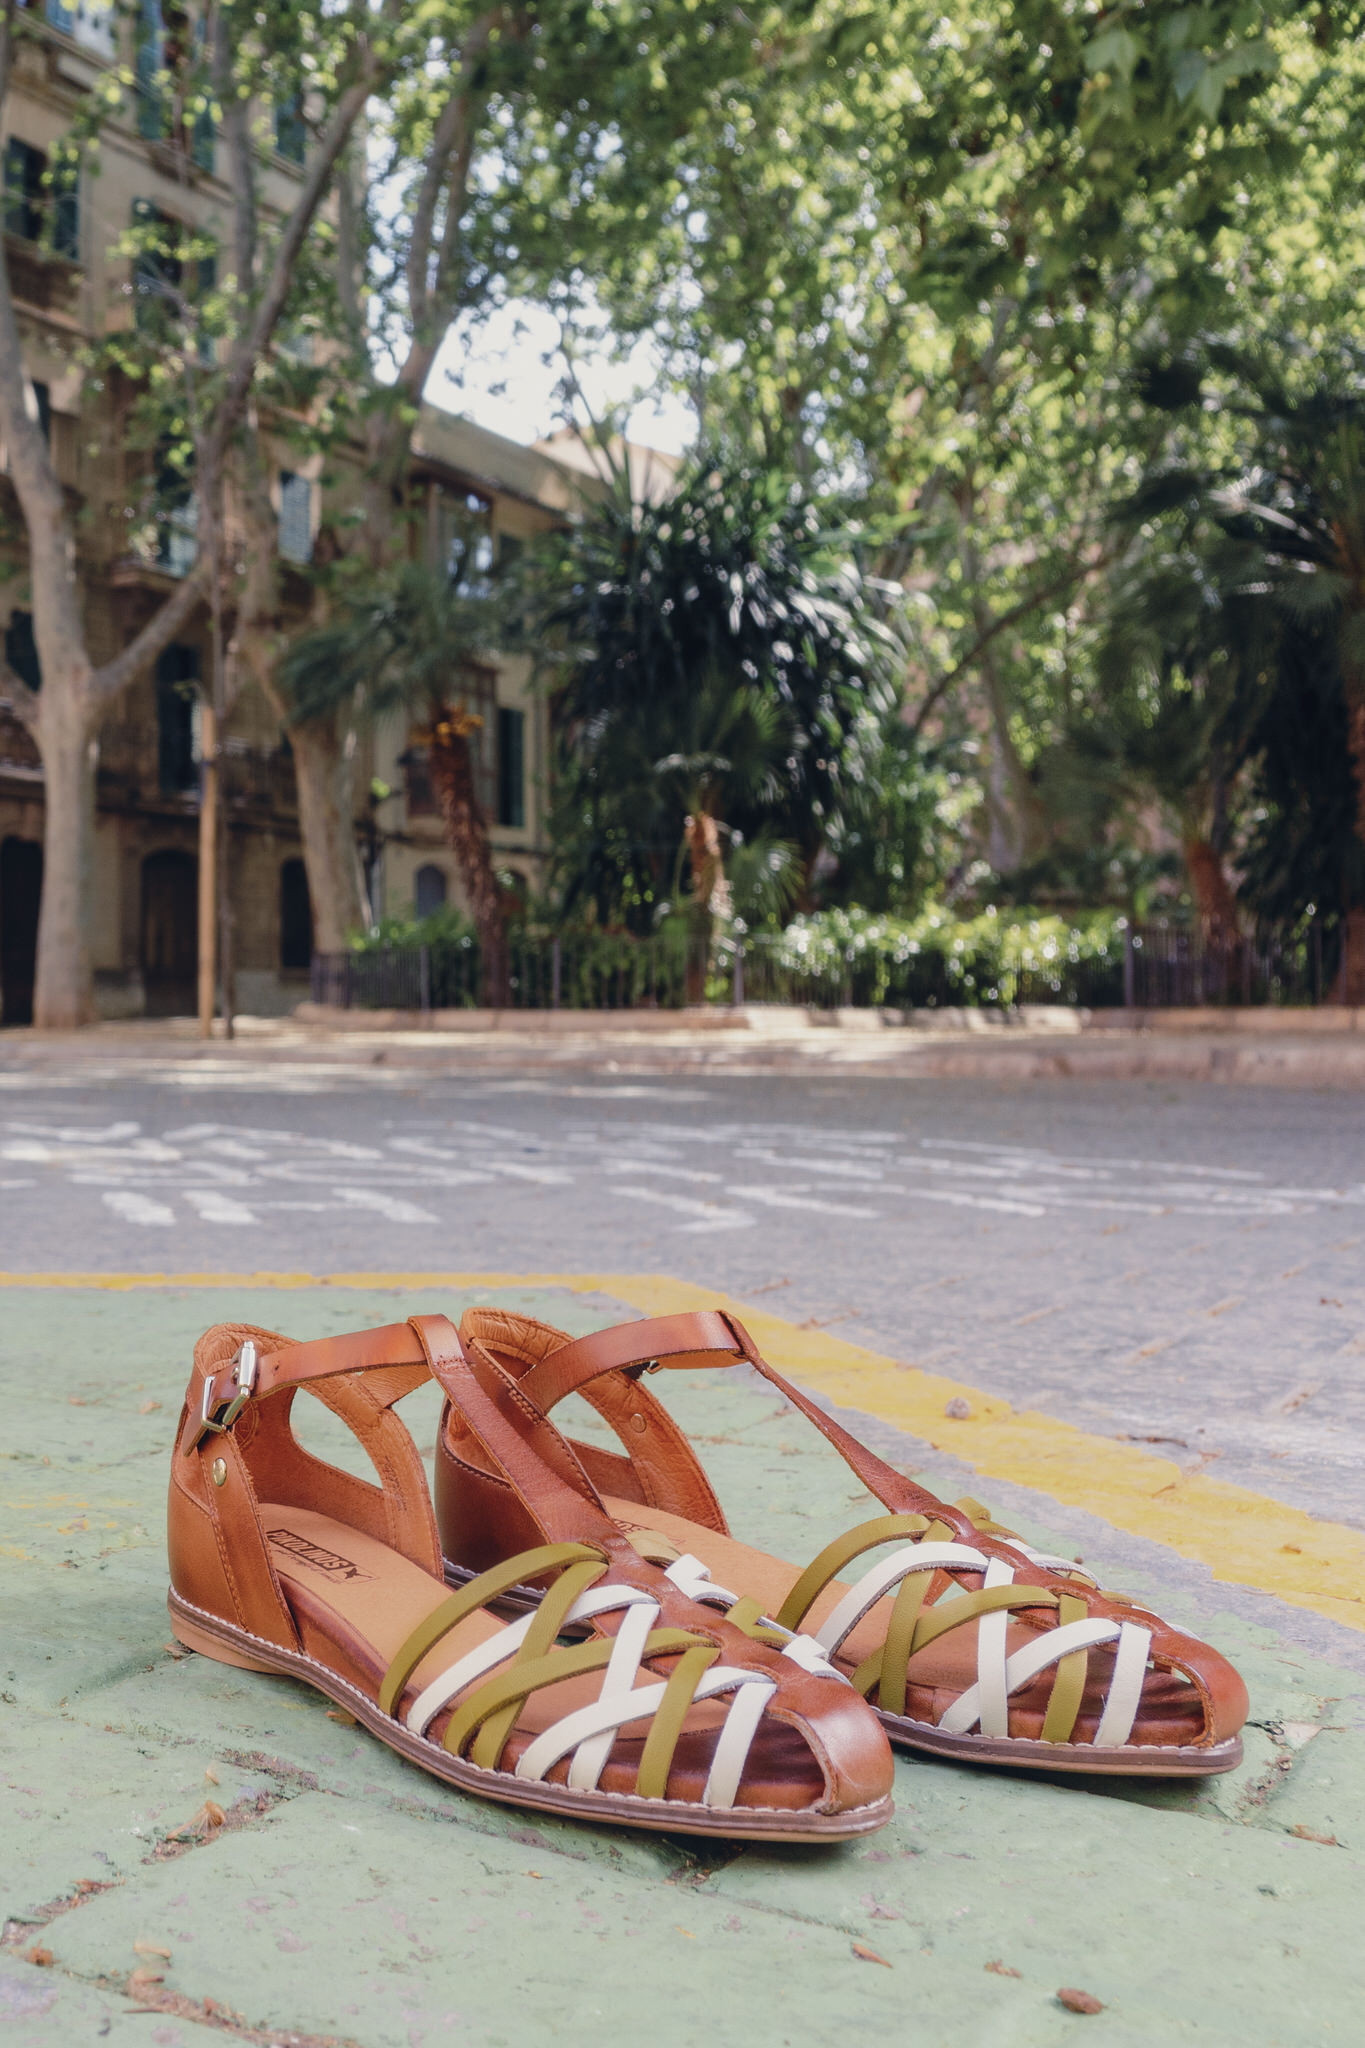 Photograph of Pikolinos women's sandals in the street